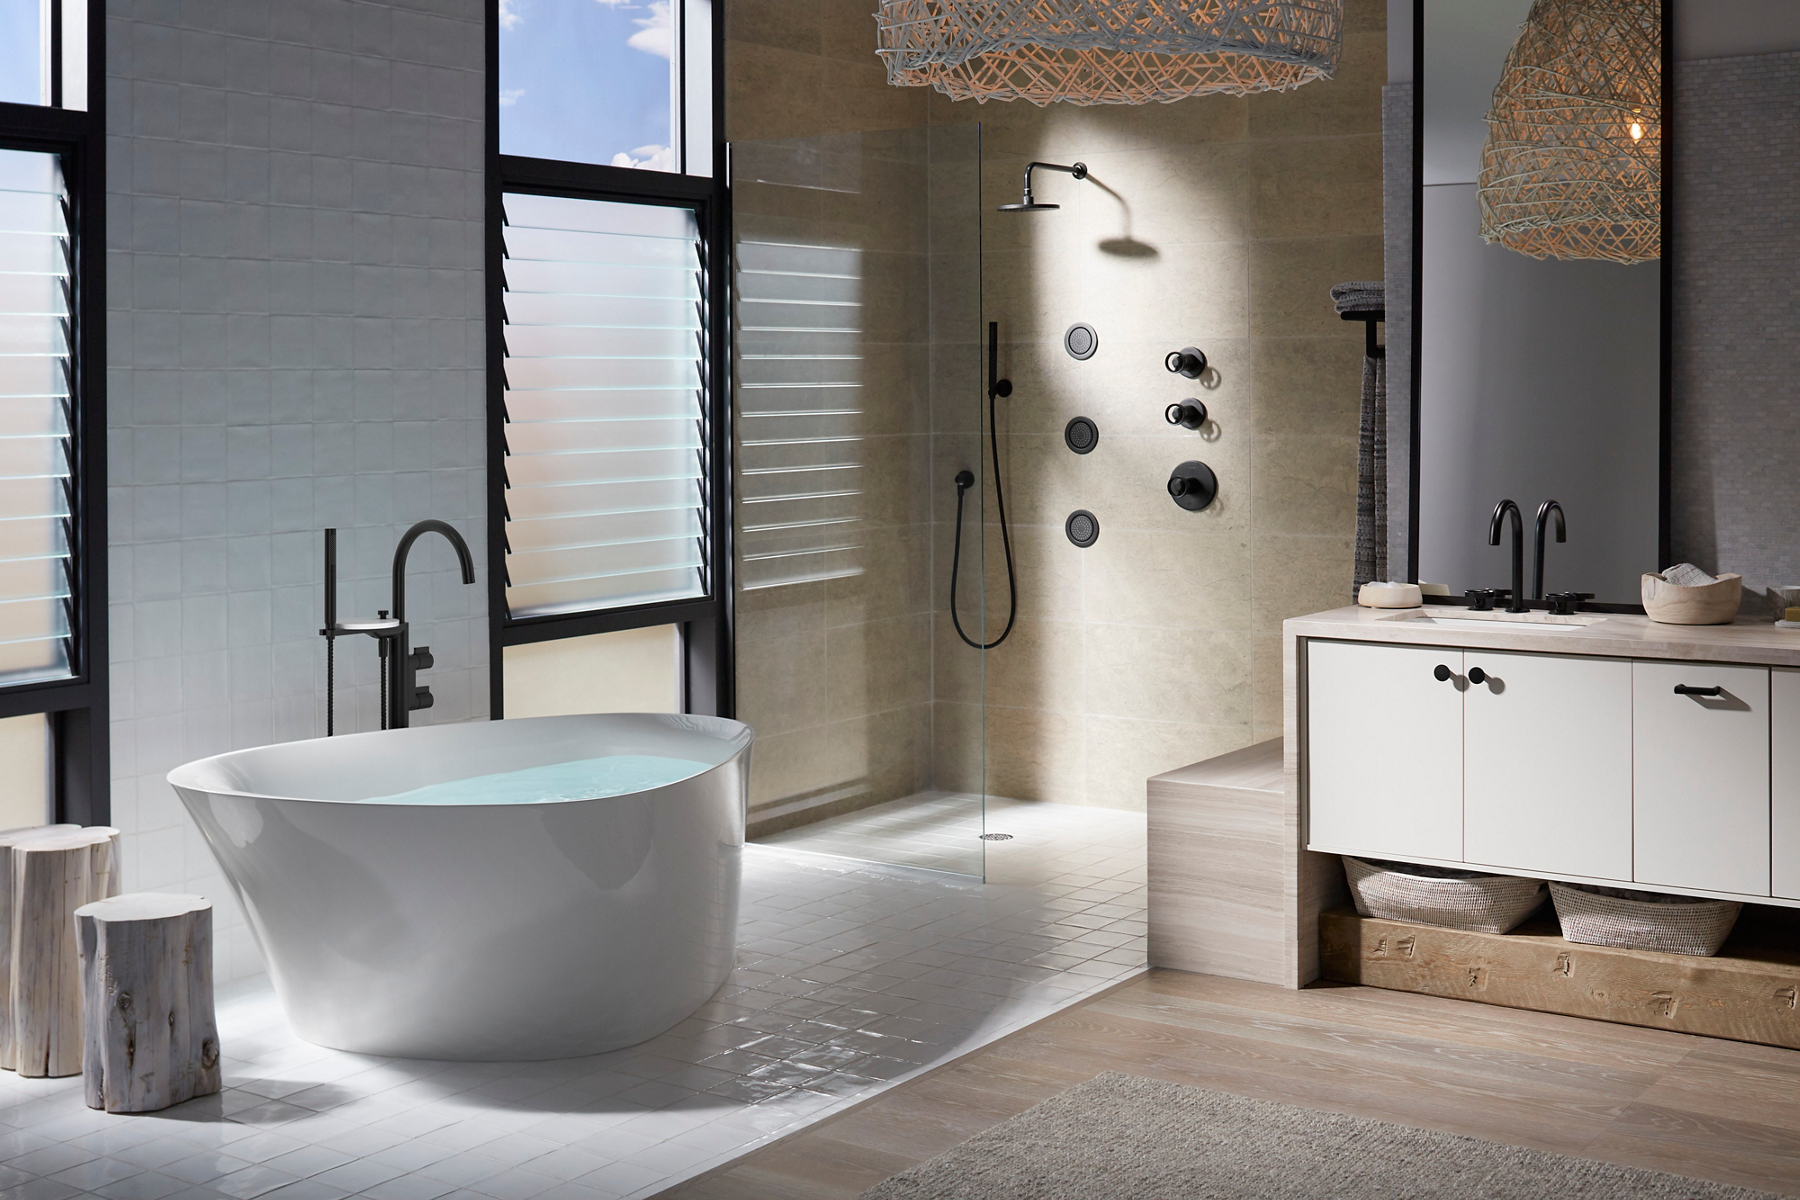 A modern bathroom in tans, off-whites, and dark grays featuring Components collection products.